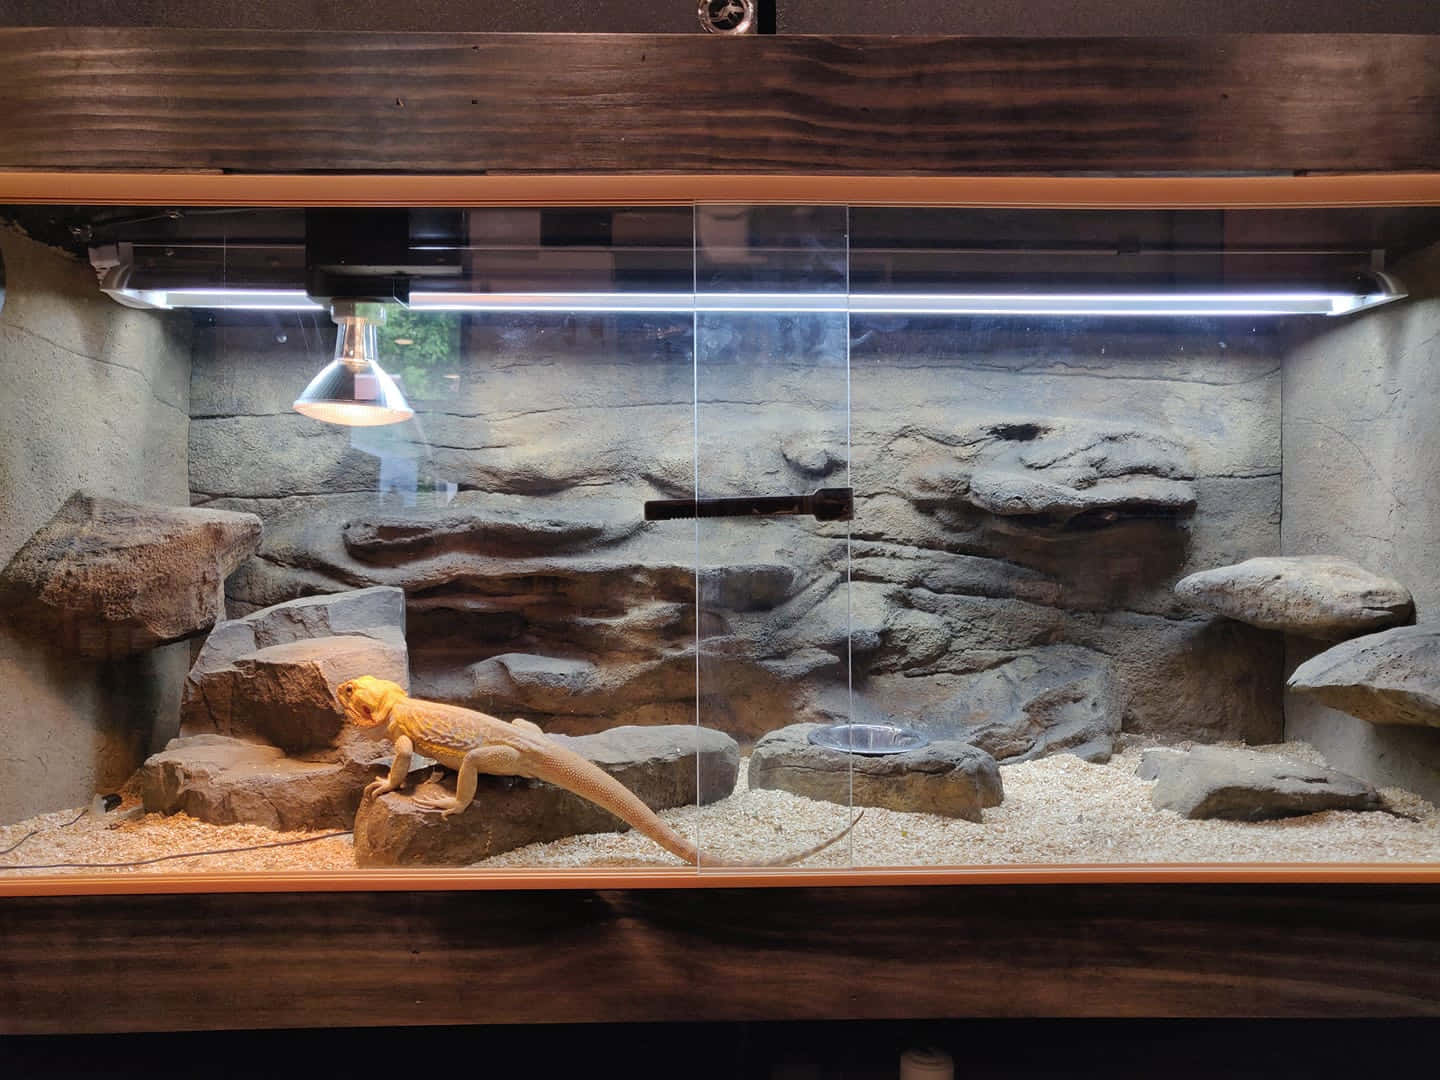 "A close up view of the inside of a brightly lit reptile tank."